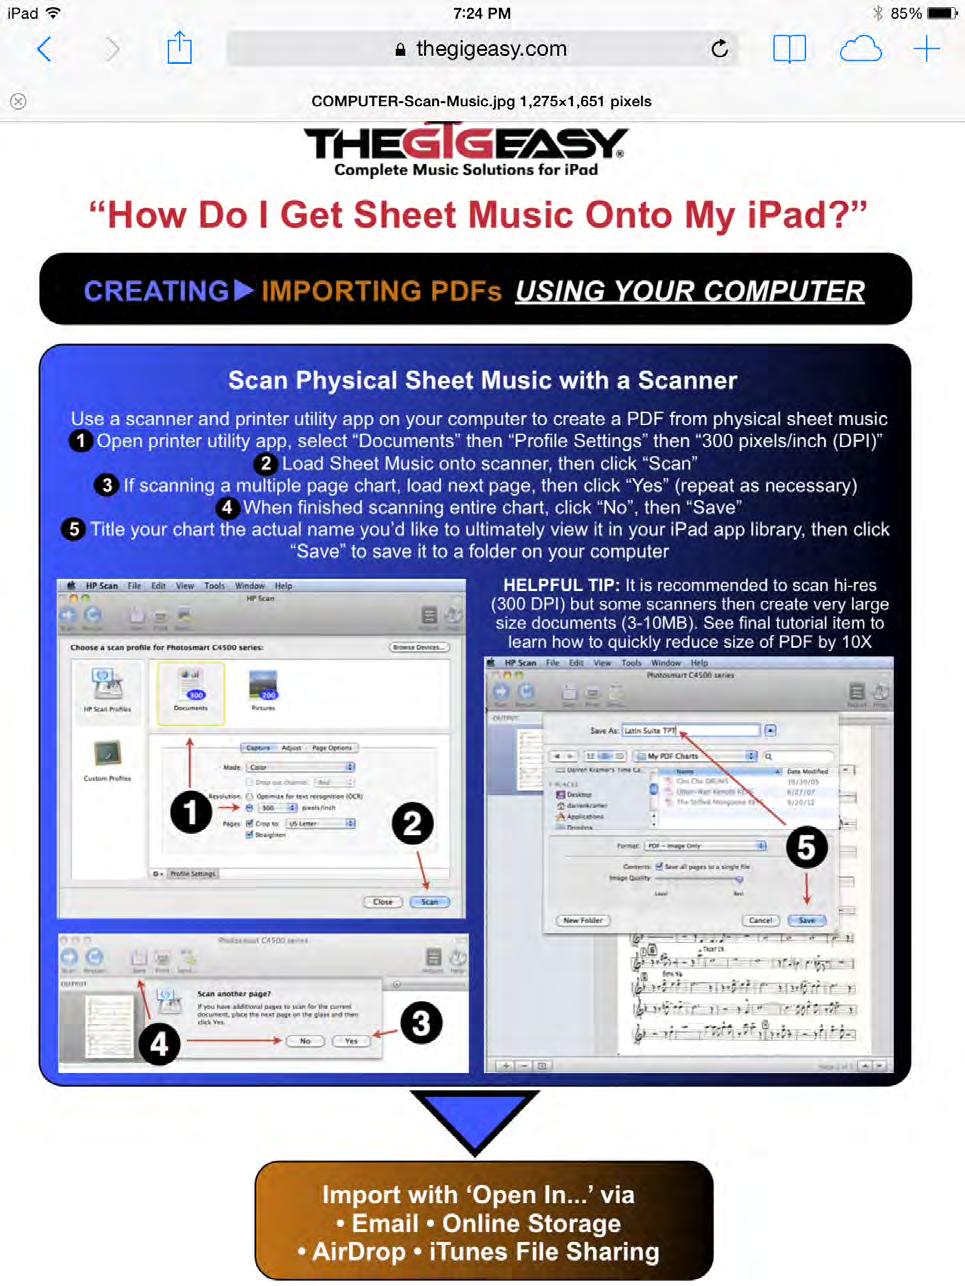 Apps - Sheet Music "How do I get sheet music onto my ipad?" 7 Ways for Creating and/or Importing PDFs USING YOUR COMPUTER 1. Buy PDF Online 2. Email PDF 3.